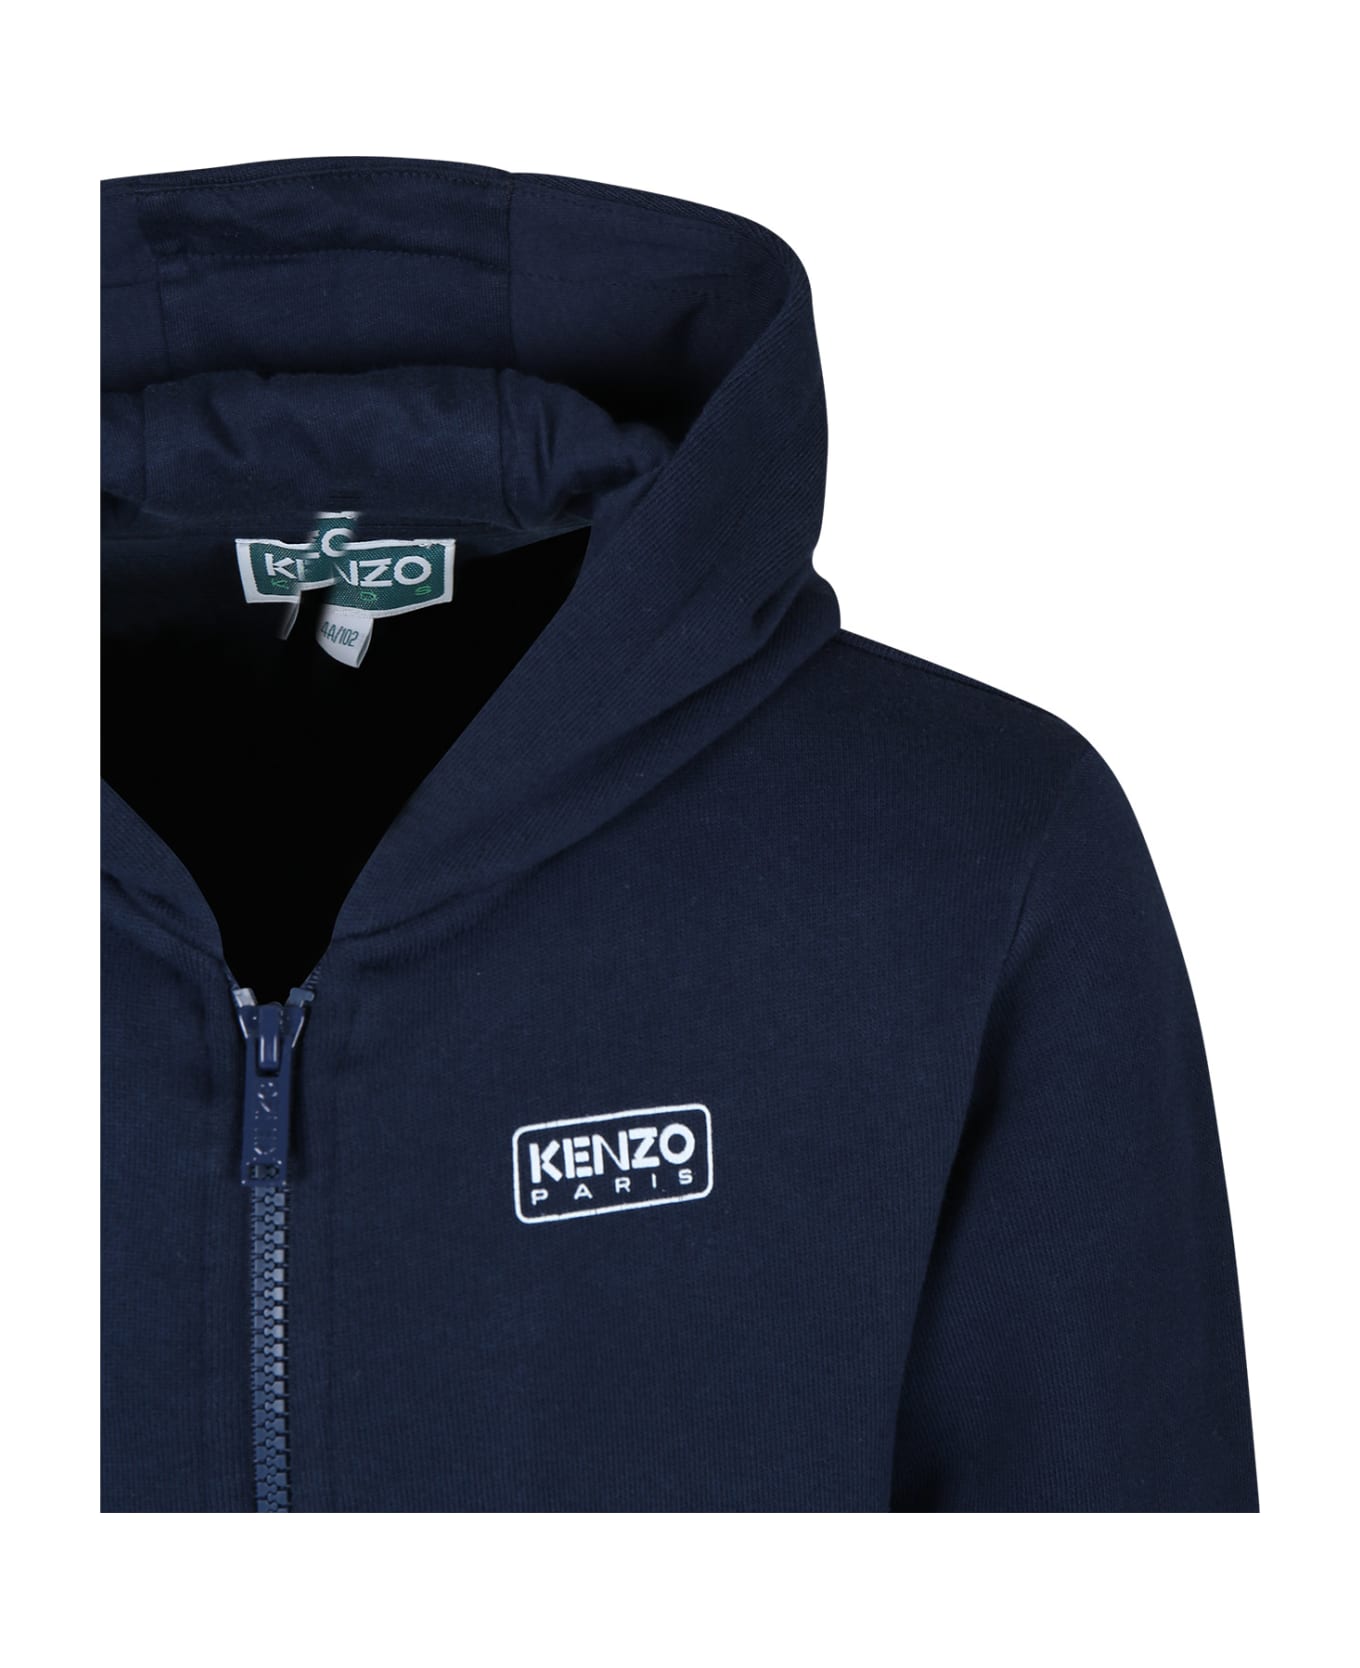 Kenzo Blue Hoodie For Boy With Logo - NAVY